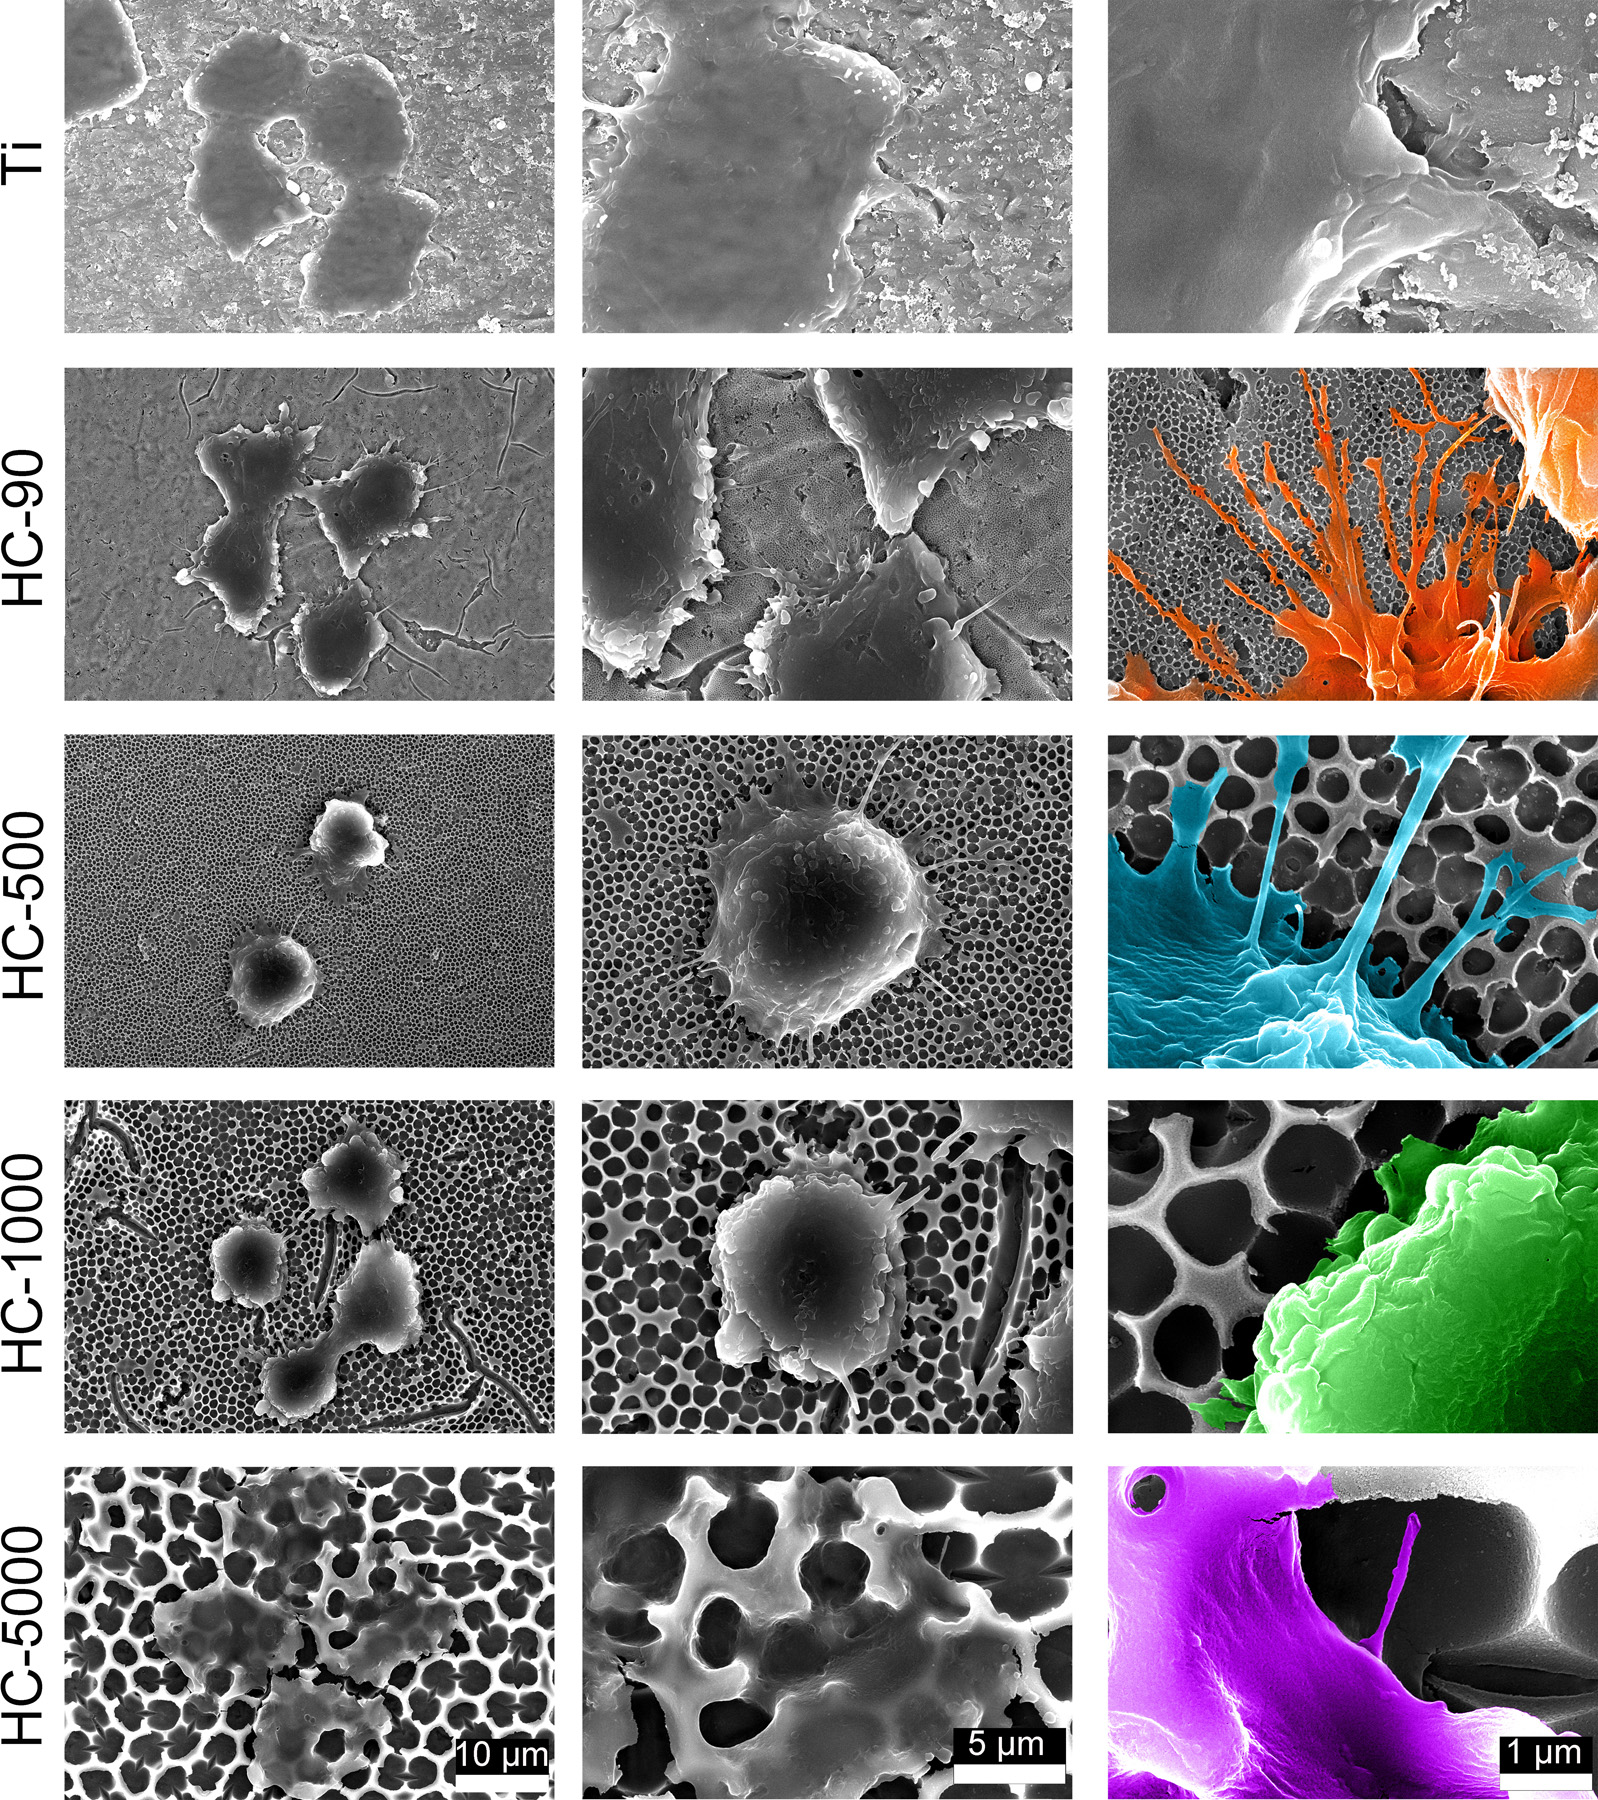 Material surface morphologies of different samples under scanning electron microscope examination.